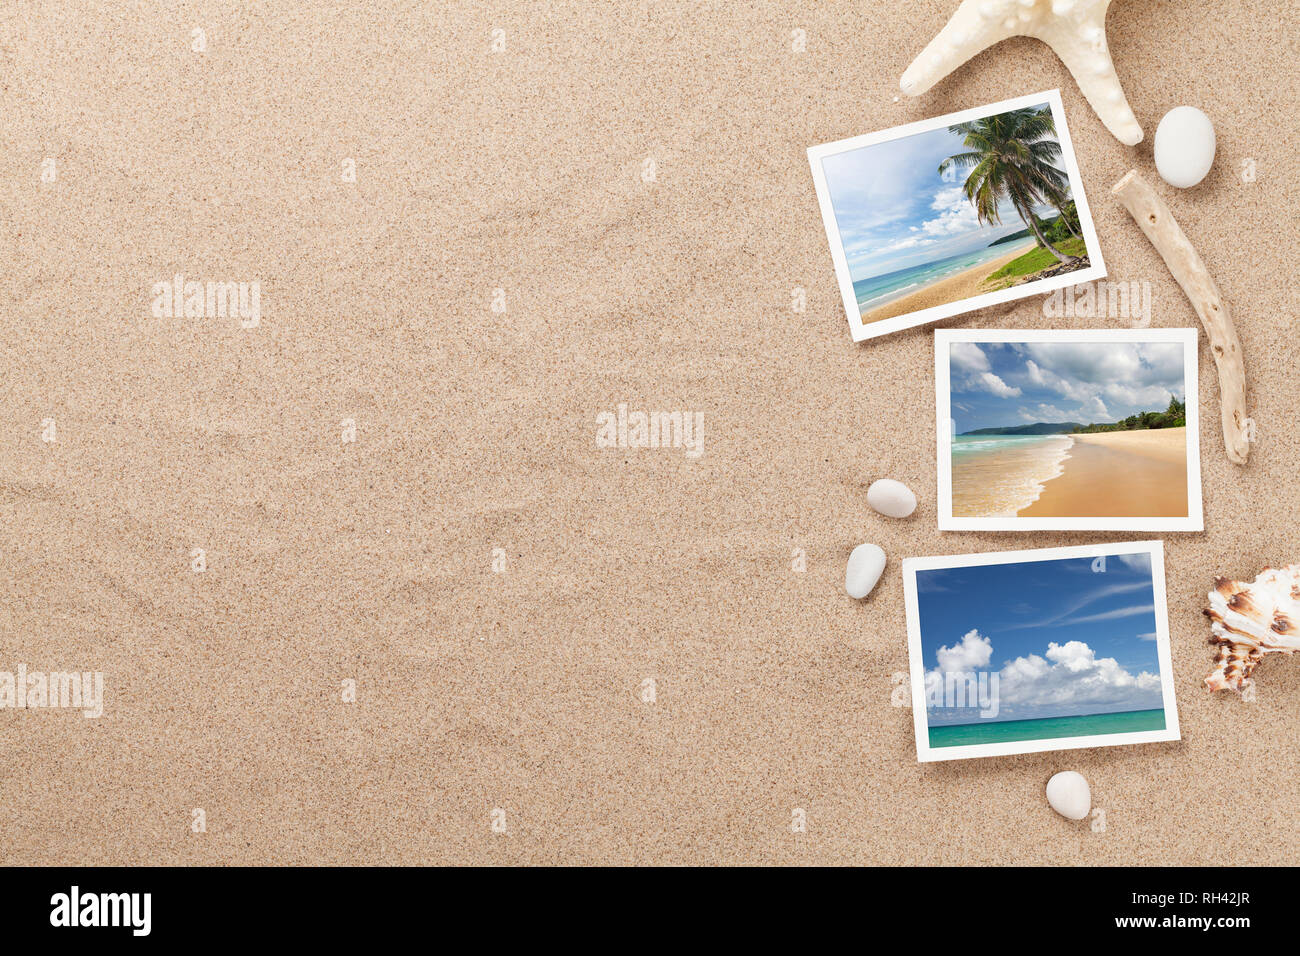 Travel vacation background concept with seashells and photos on sand backdrop. Top view with copy space. Flat lay. All photos taken by me Stock Photo